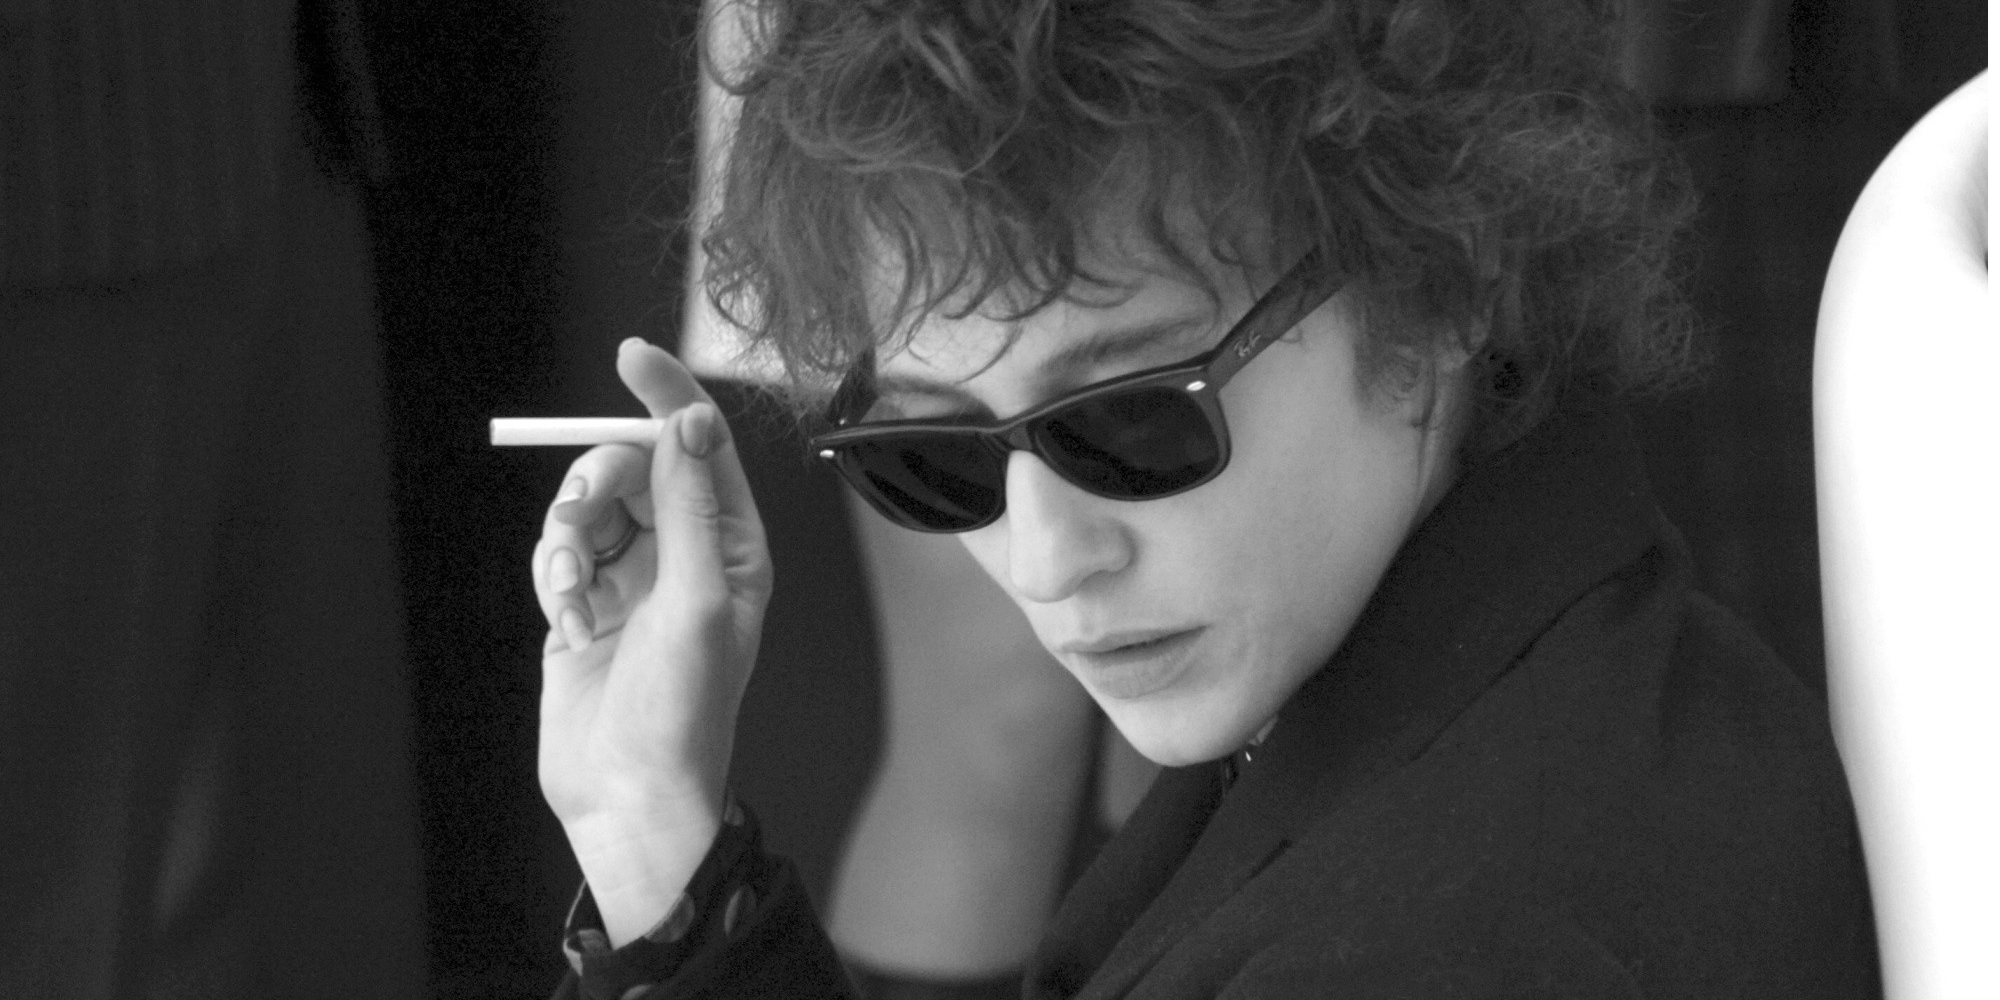 Boby Dylan holding a cigarrette and looking down in I'm Not There.